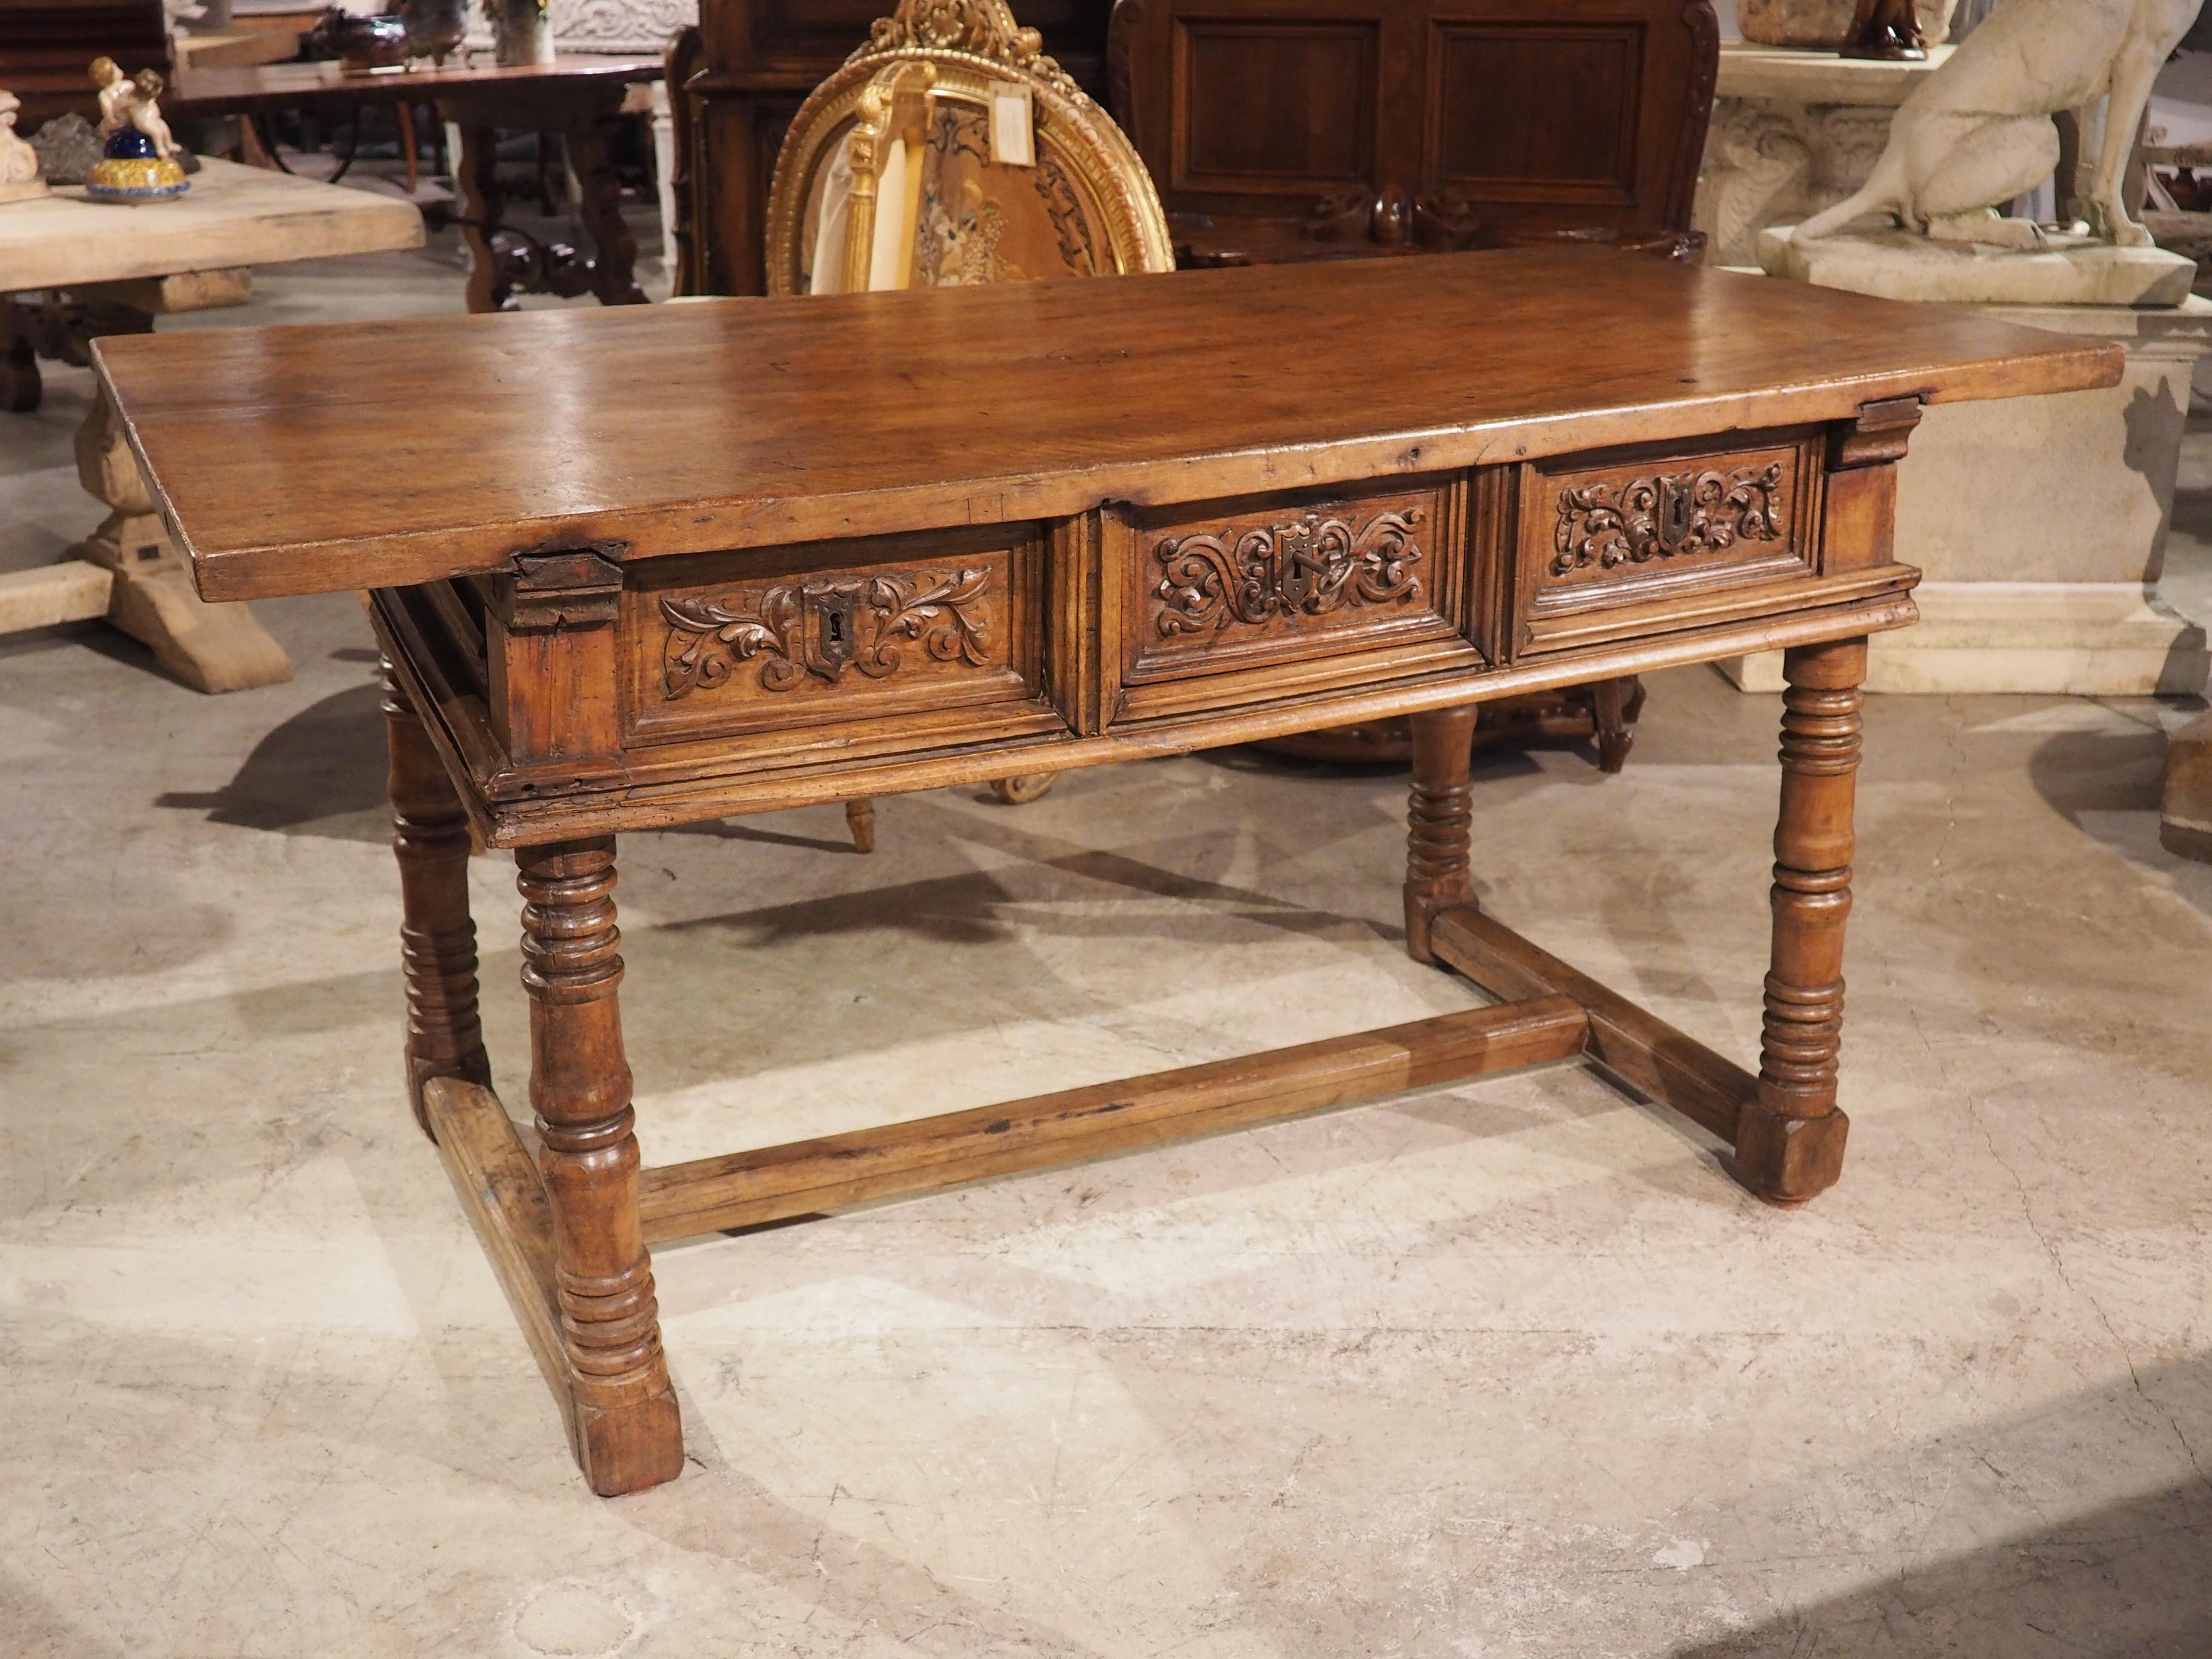 A beautifully crafted wooden table from Spain, the walnut was hand-carved at the end of the Renaissance (in the 1600’s). As is the case with most Spanish Renaissance tables, the 1 ½” thick single plank top rests upon tightly turned legs. The edges